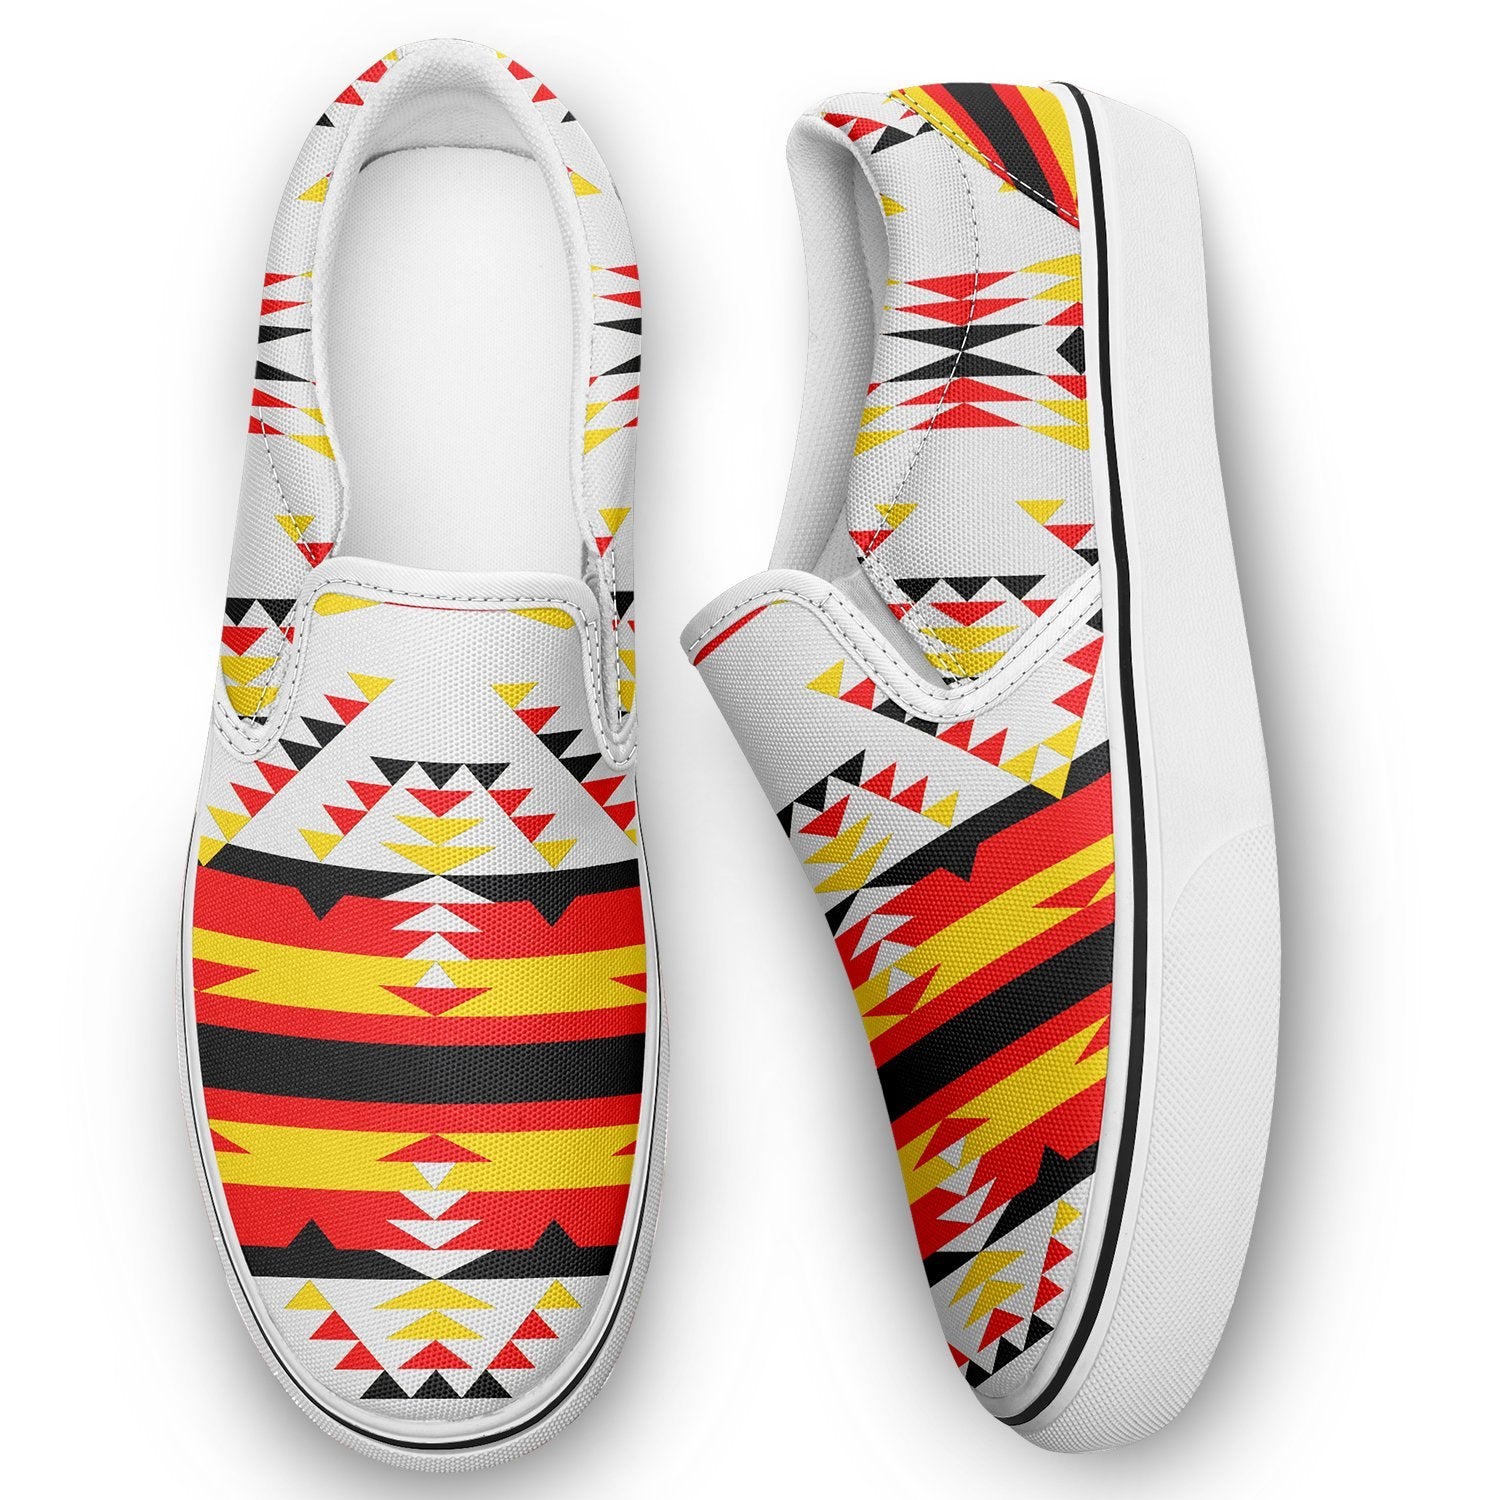 Visions of Peace Directions Otoyimm Canvas Slip On Shoes 49 Dzine 